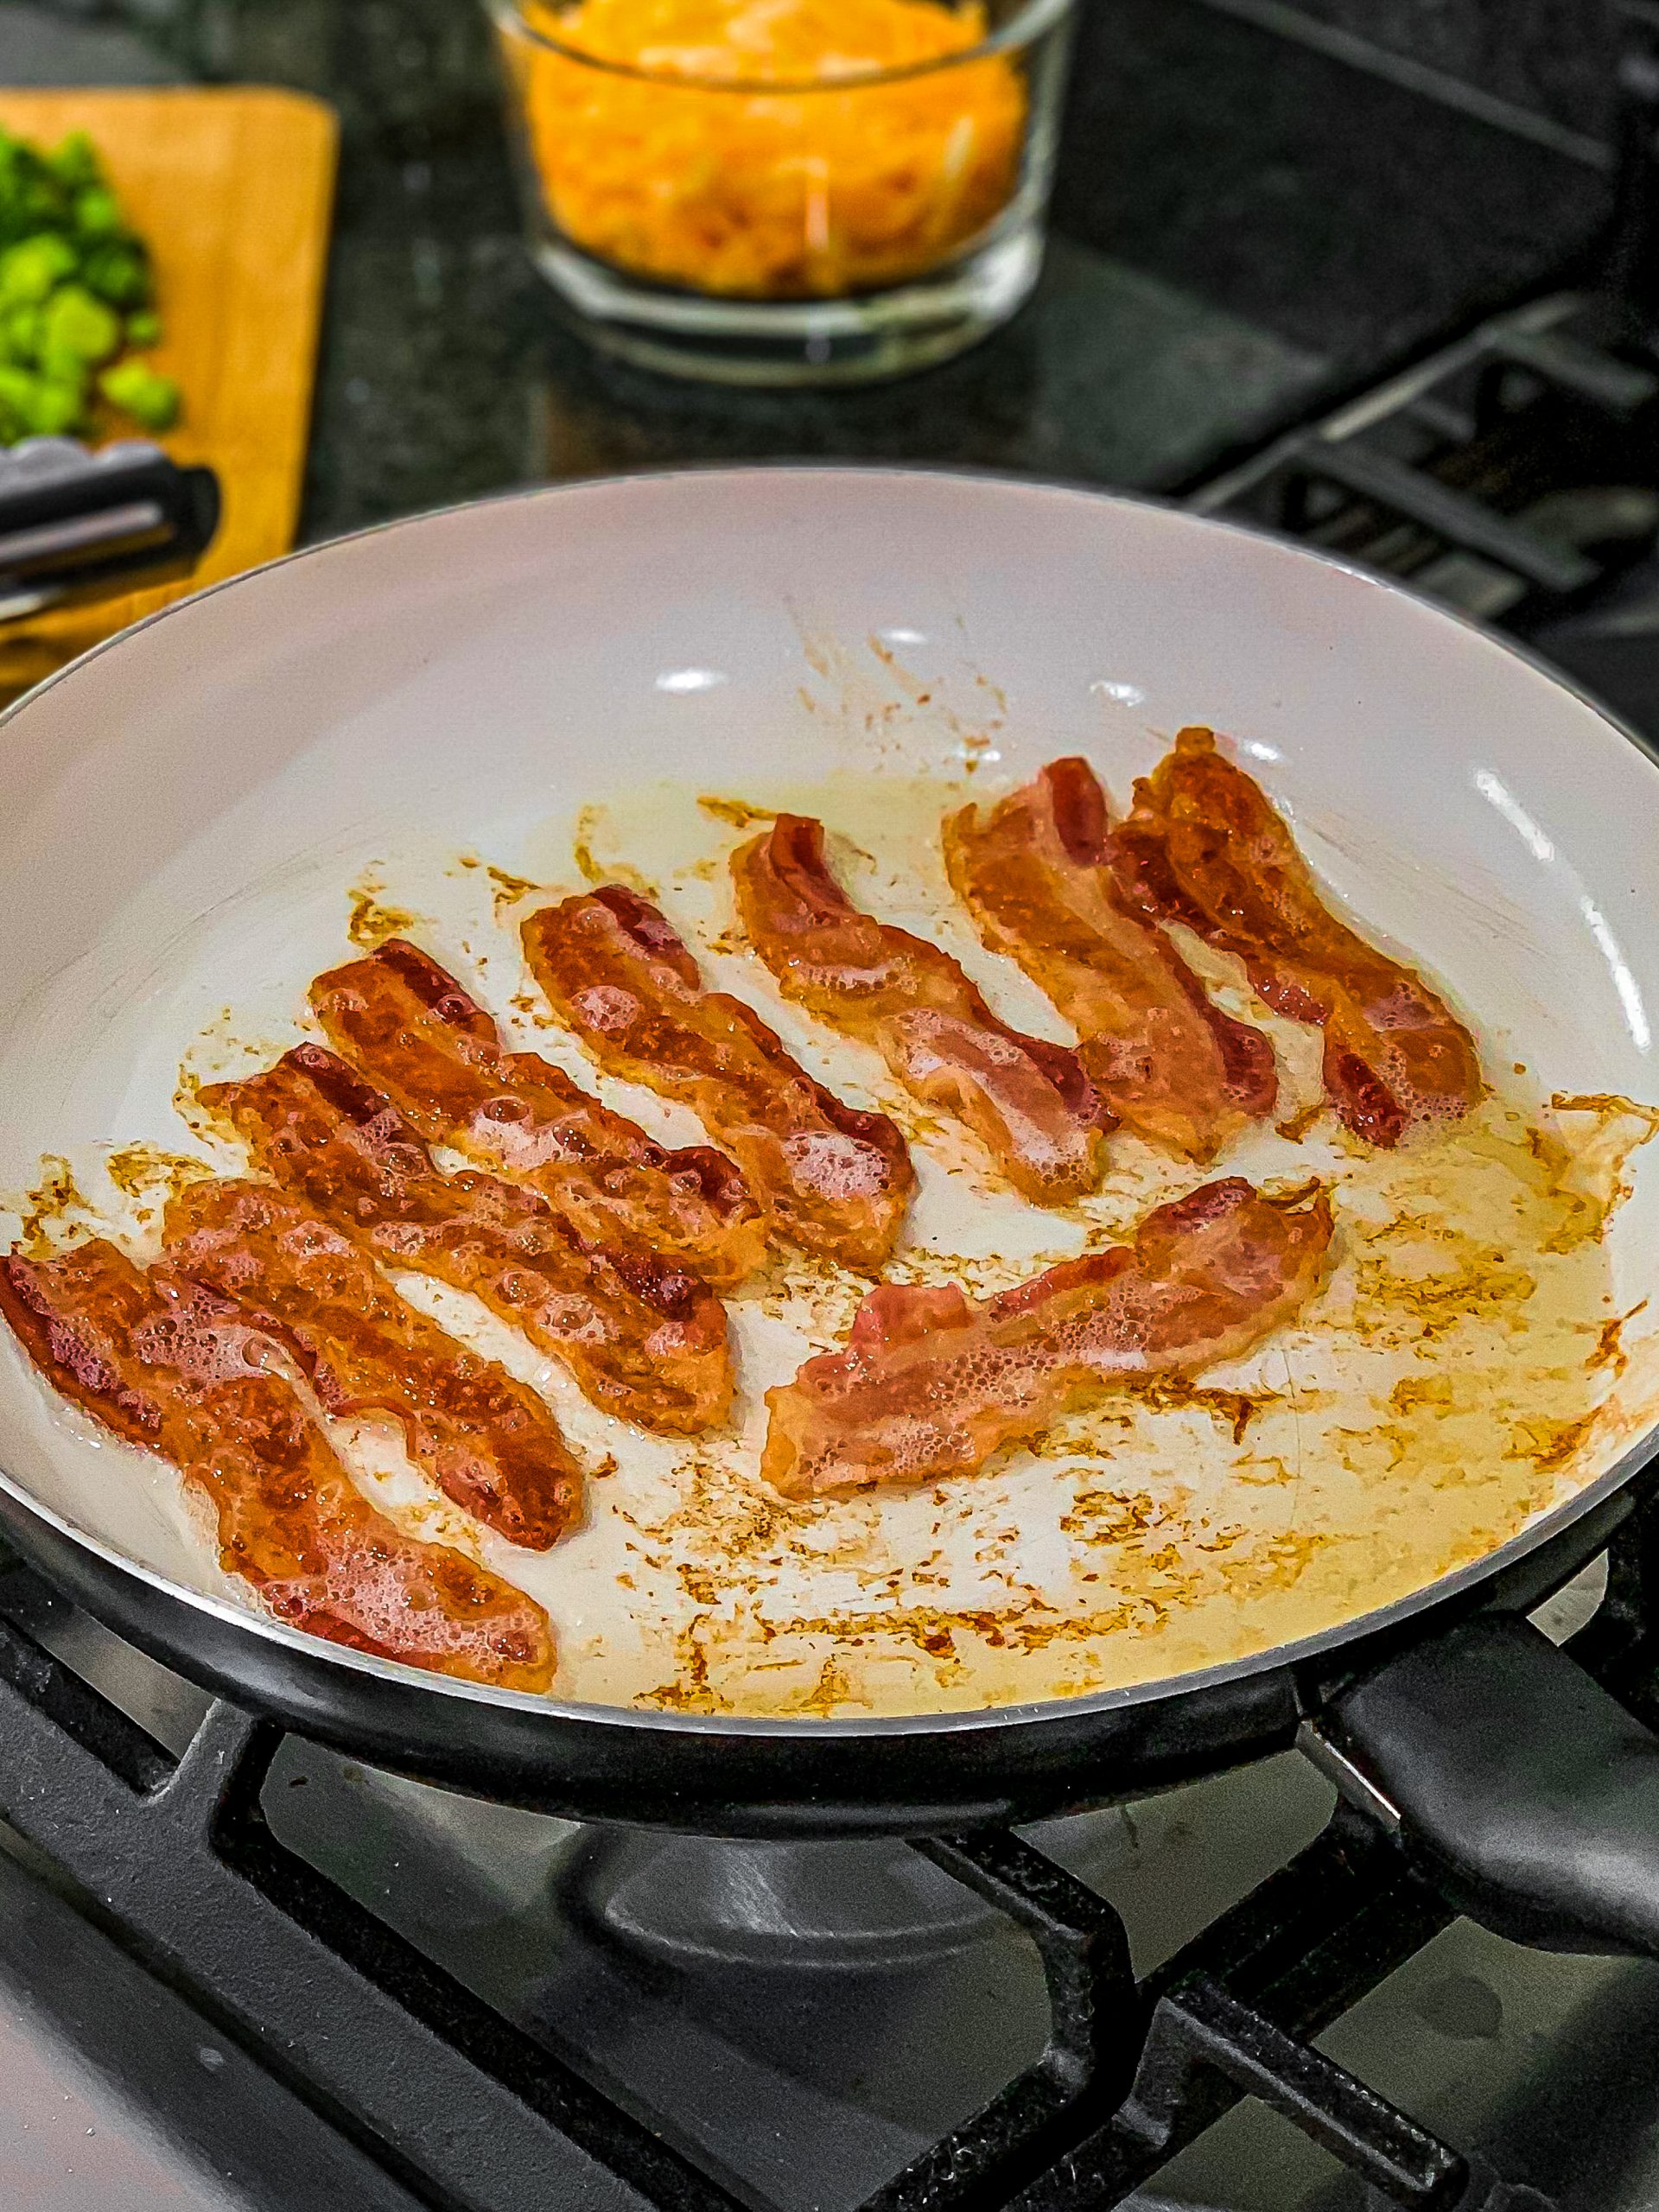 Fry bacon while the chicken and potatoes are in the oven.